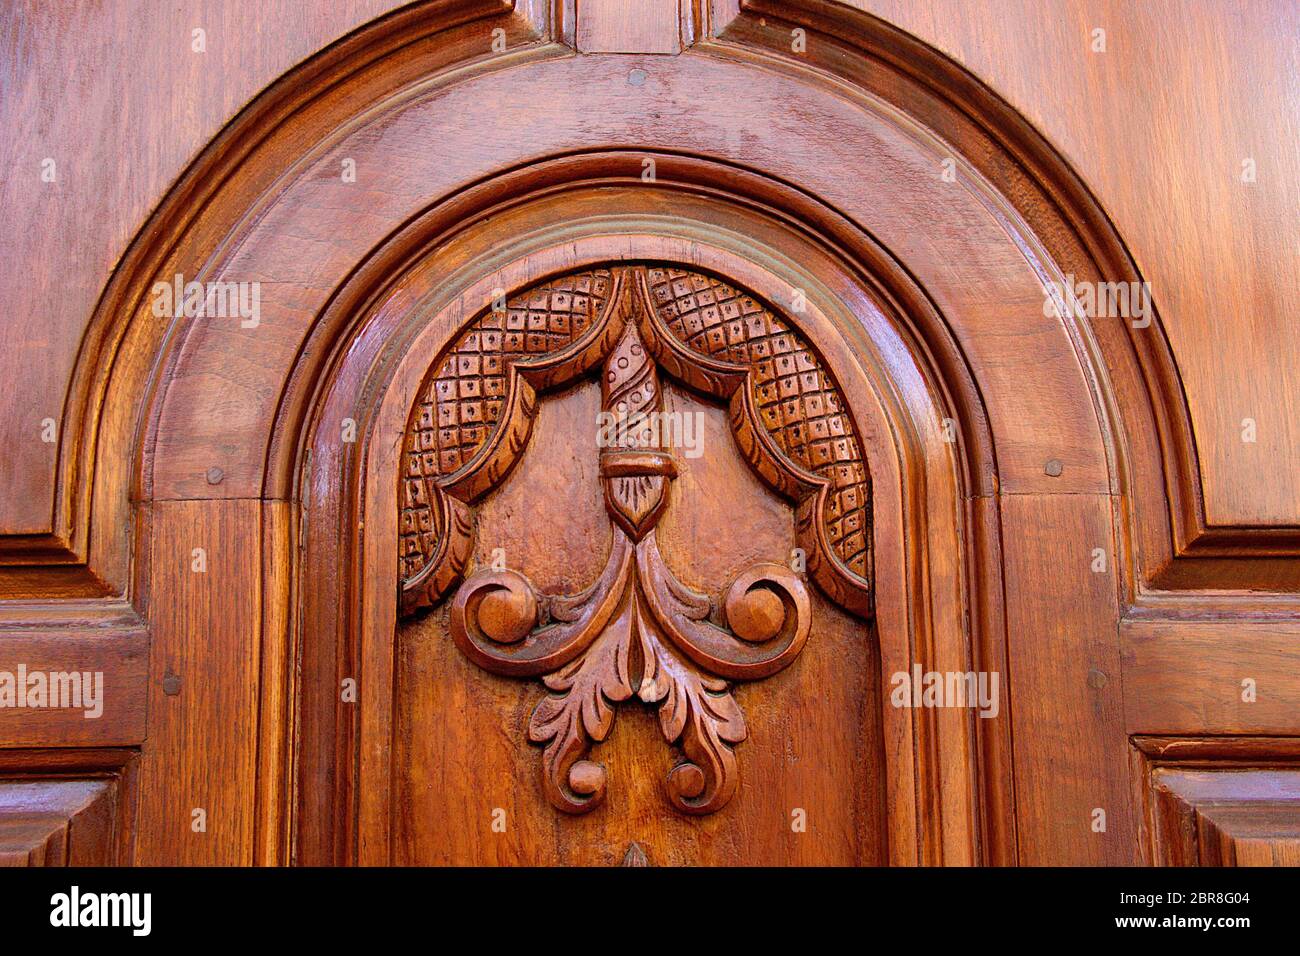 View of floral art and arch design on panel of wooden door Stock ...